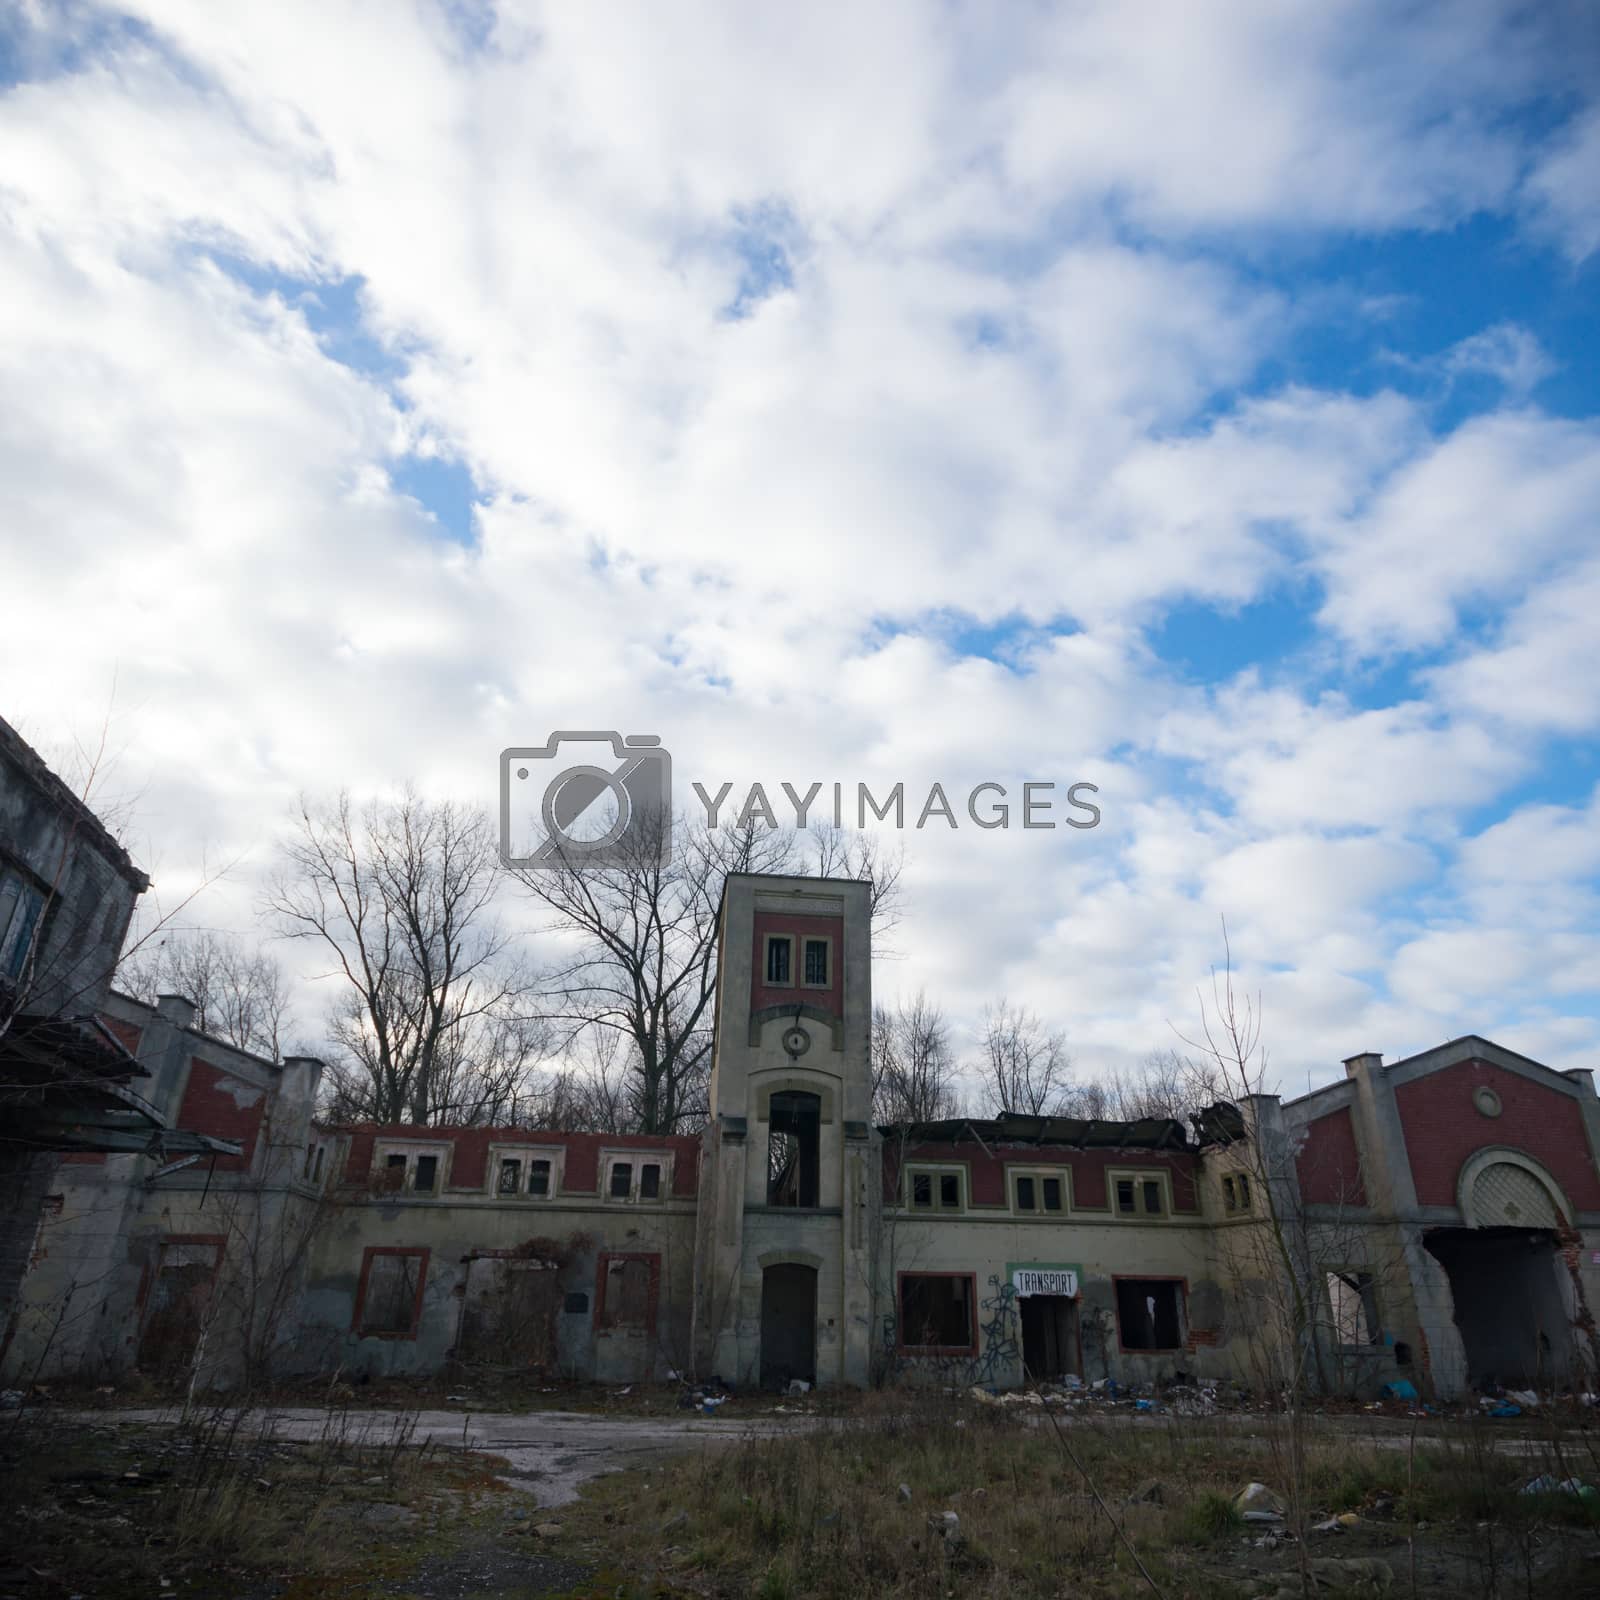 Royalty free image of factory by TSpider